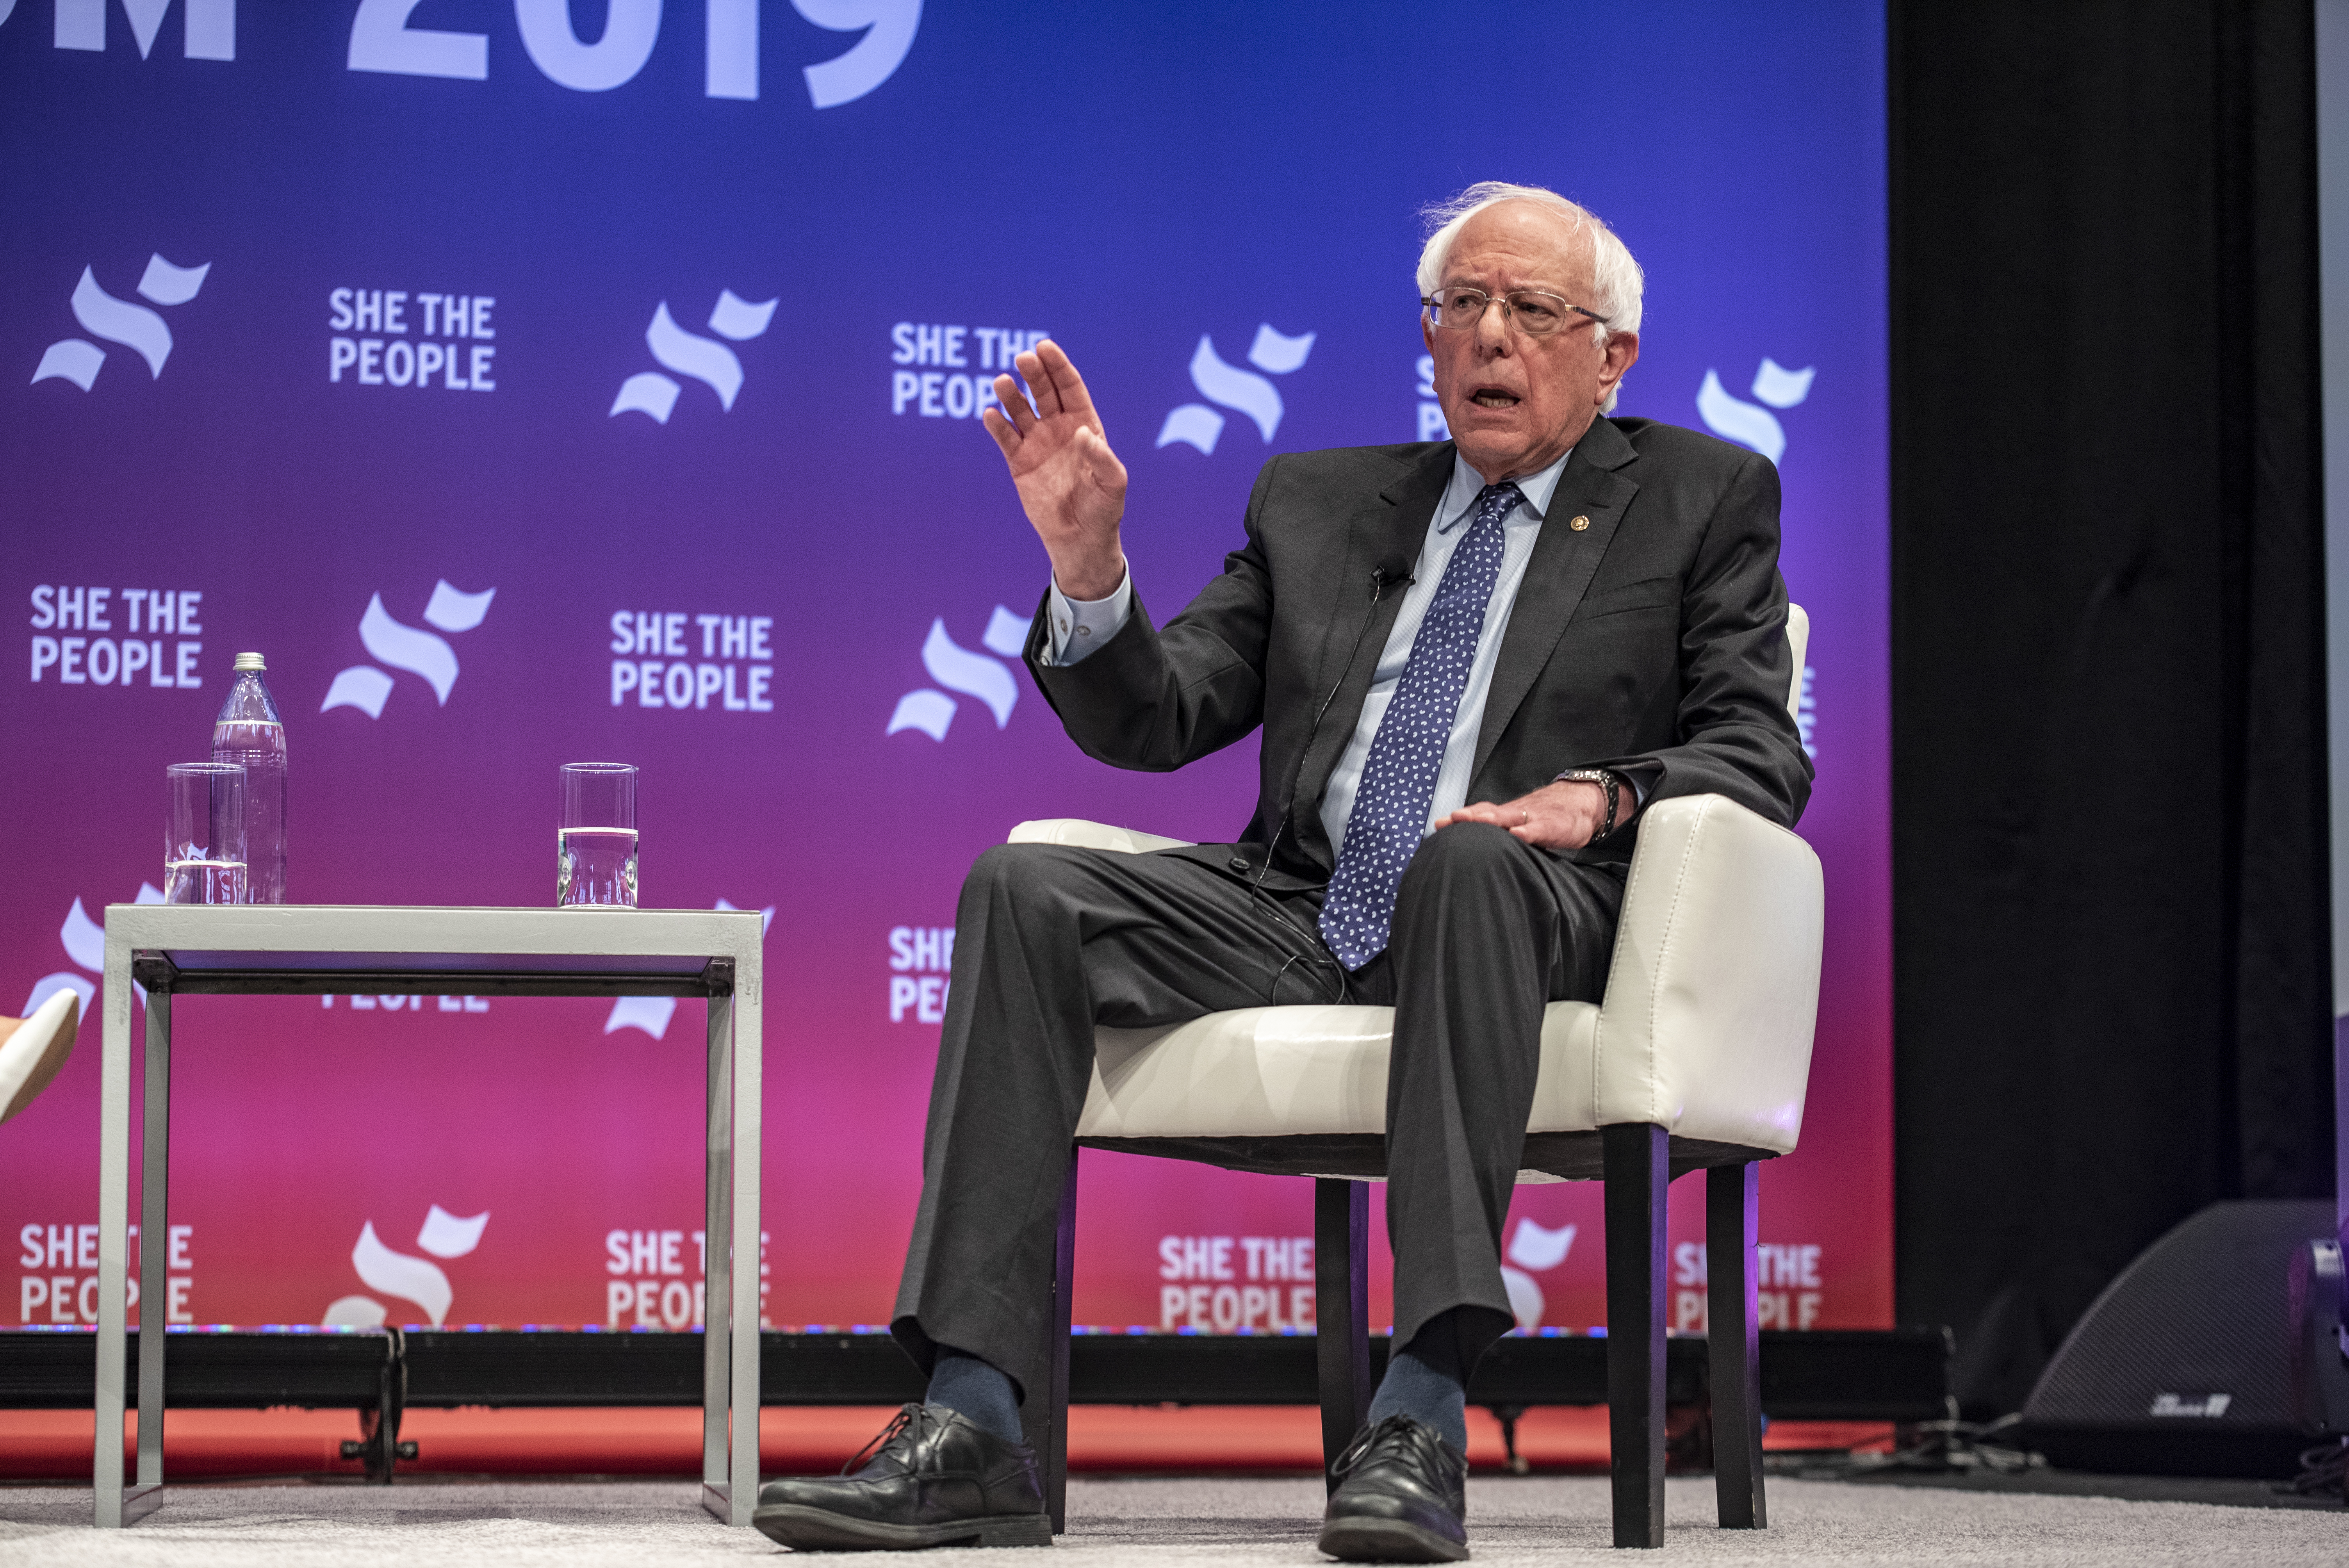 HOUSTON, TX - APRIL 24: Democratic presidential candidate Sen. Bernie Sanders (I-VT) speaks to a crowd at the She The People Presidential Forum at Texas Southern University on April 24, 2019 in Houston, Texas. Many of the Democrat presidential candidates are attending the forum to focus on issues important to women of color. (Photo by Sergio Flores/Getty Images)